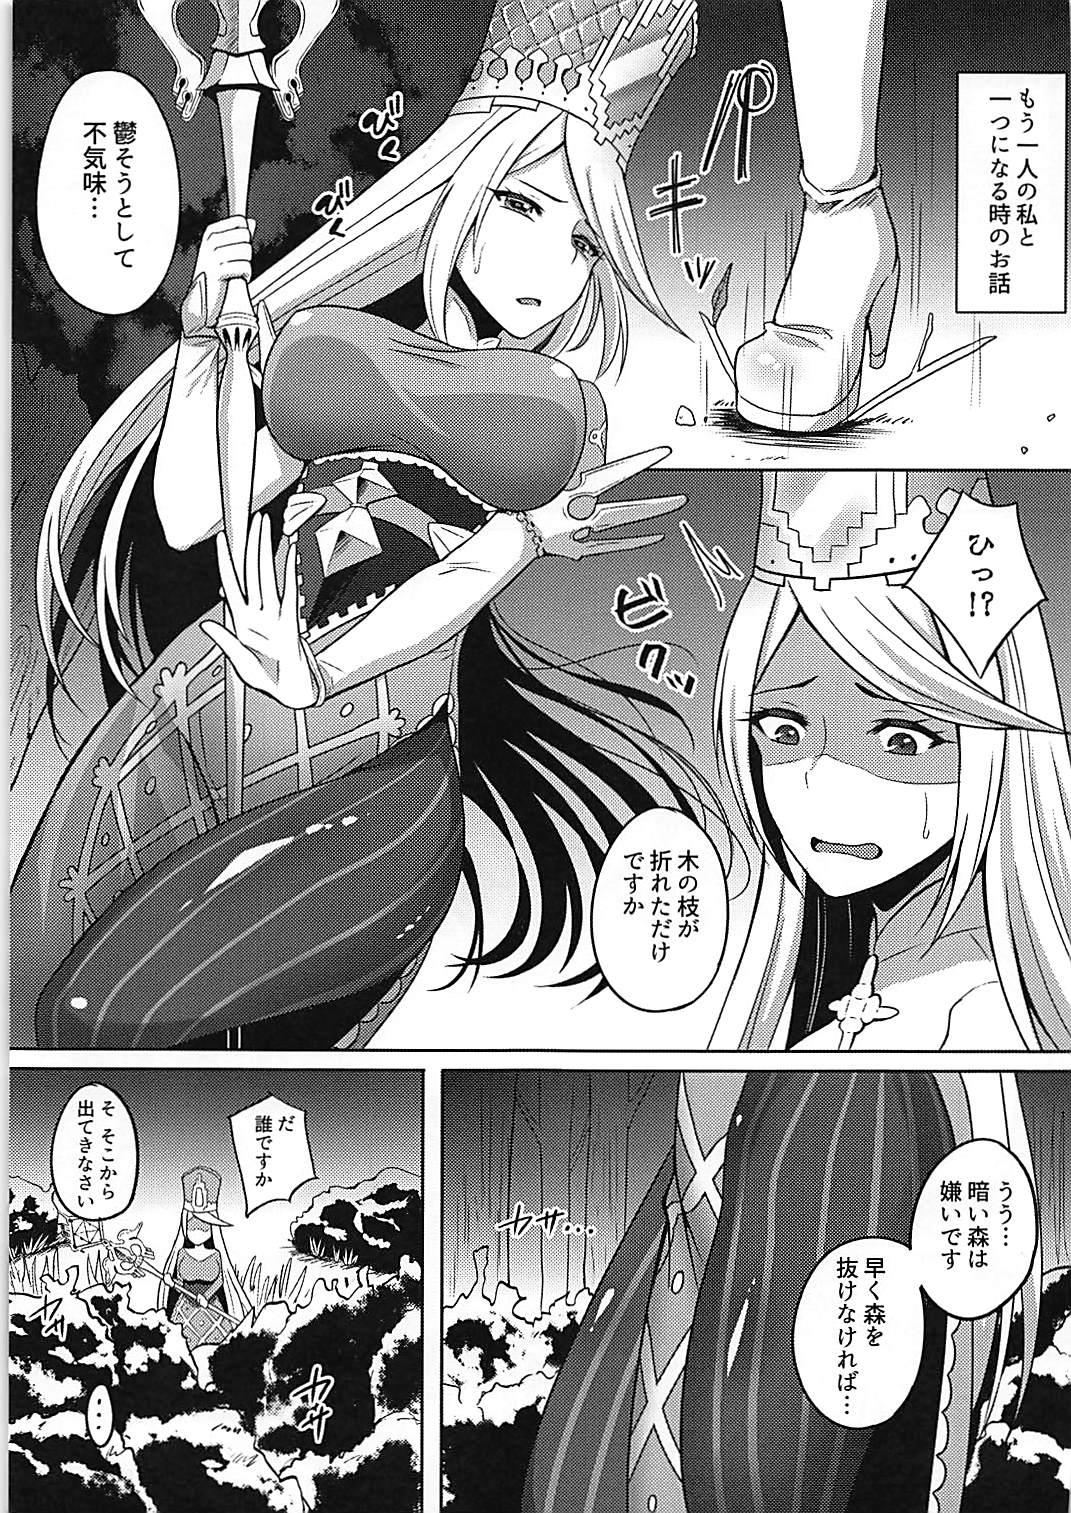 Cuck 救いの光 - Shadowverse Bisexual - Page 3